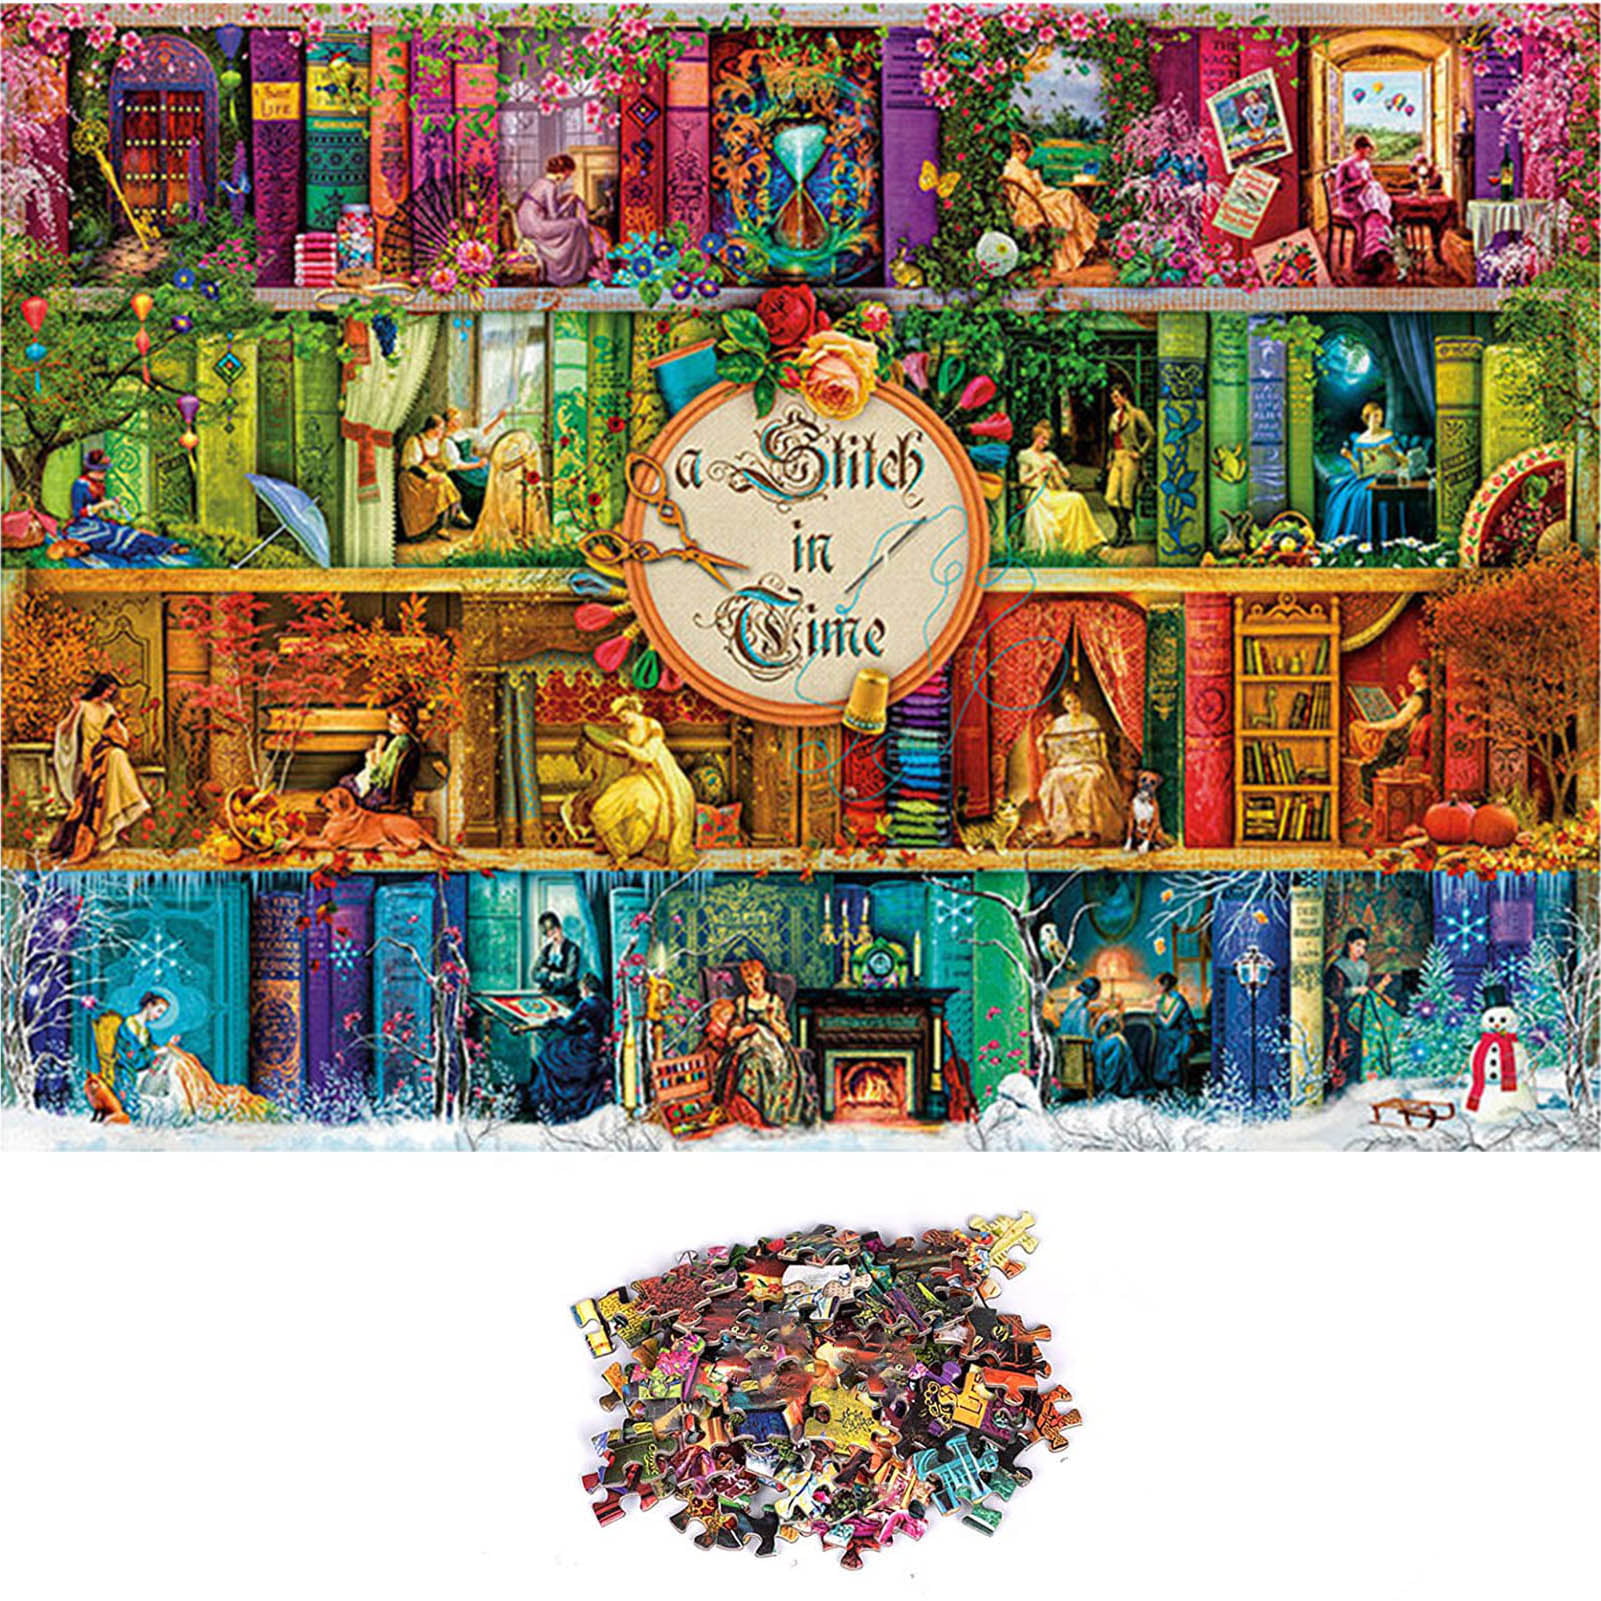 4000 Pieces of Adult Jigsaw Puzzle Bird Game Indoor Educational Activities Entertaining Puzzle Games for Adults and Children